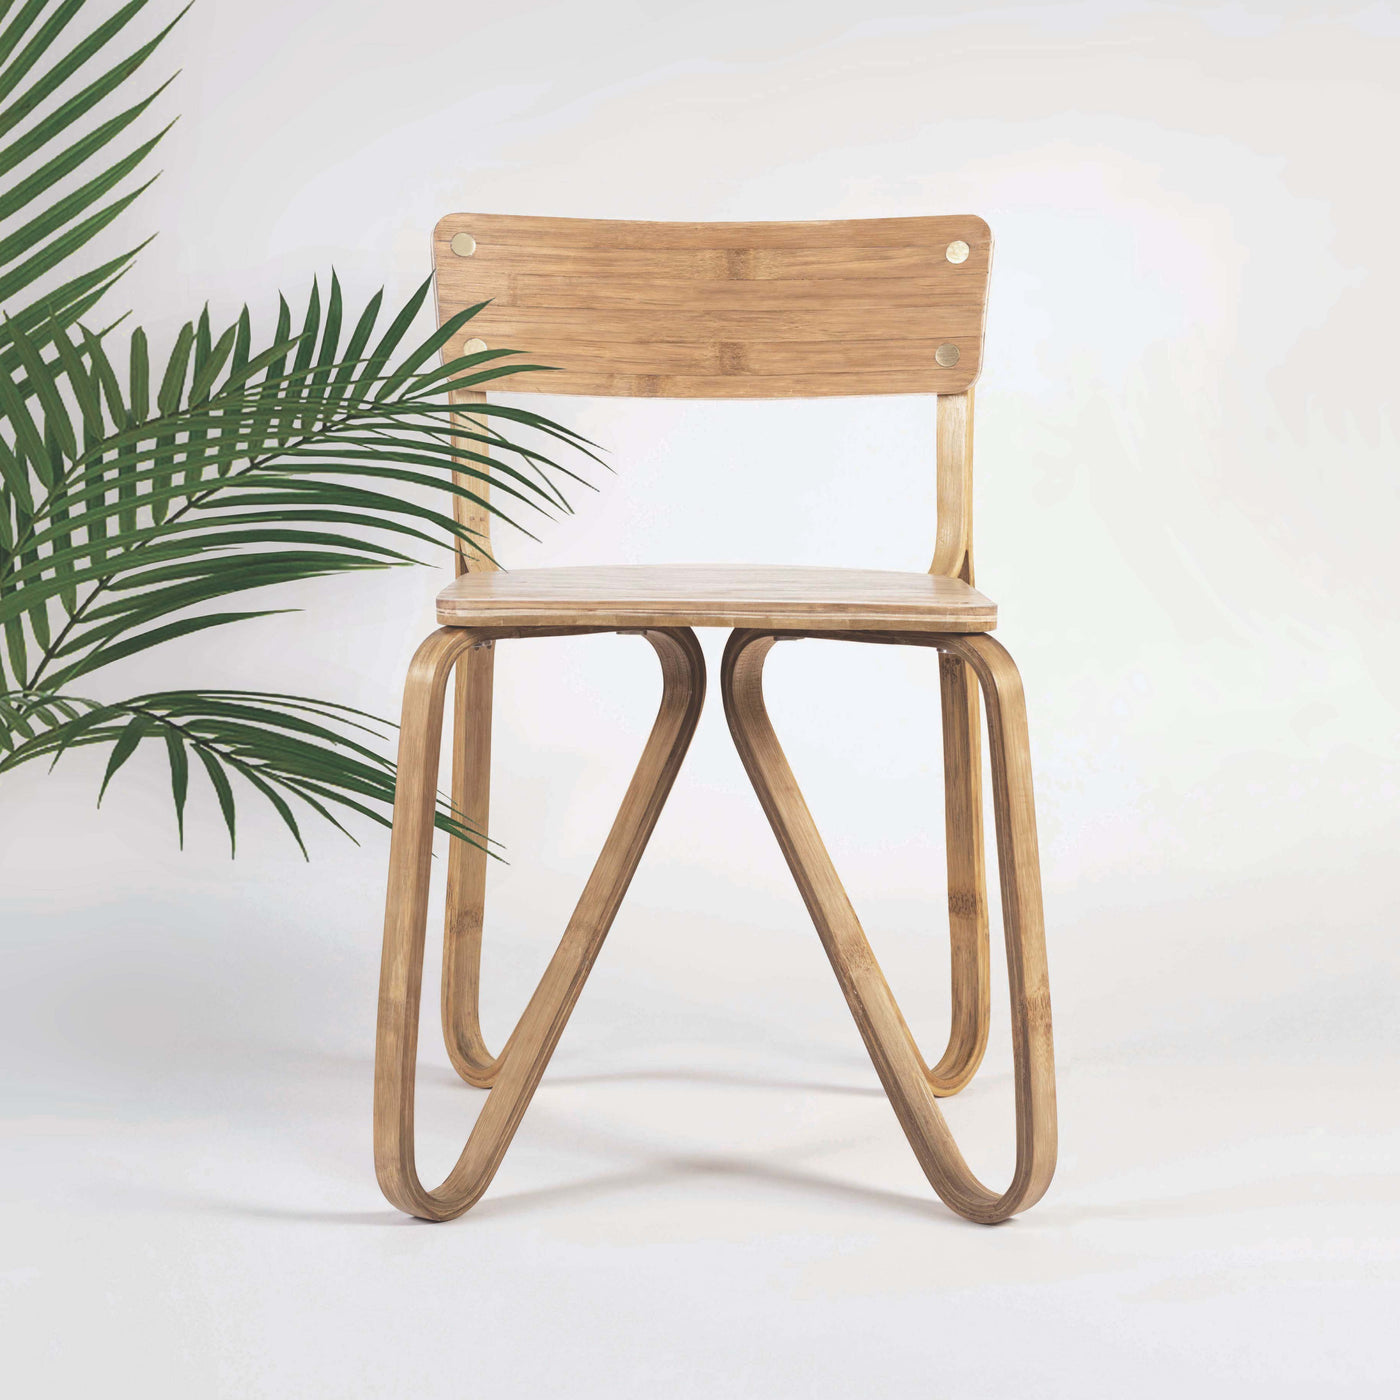 Baans Butterfly Bamboo Chair-Furnishings-BAMBOO, CHAIRS-Forest Homes-Nature inspired decor-Nature decor